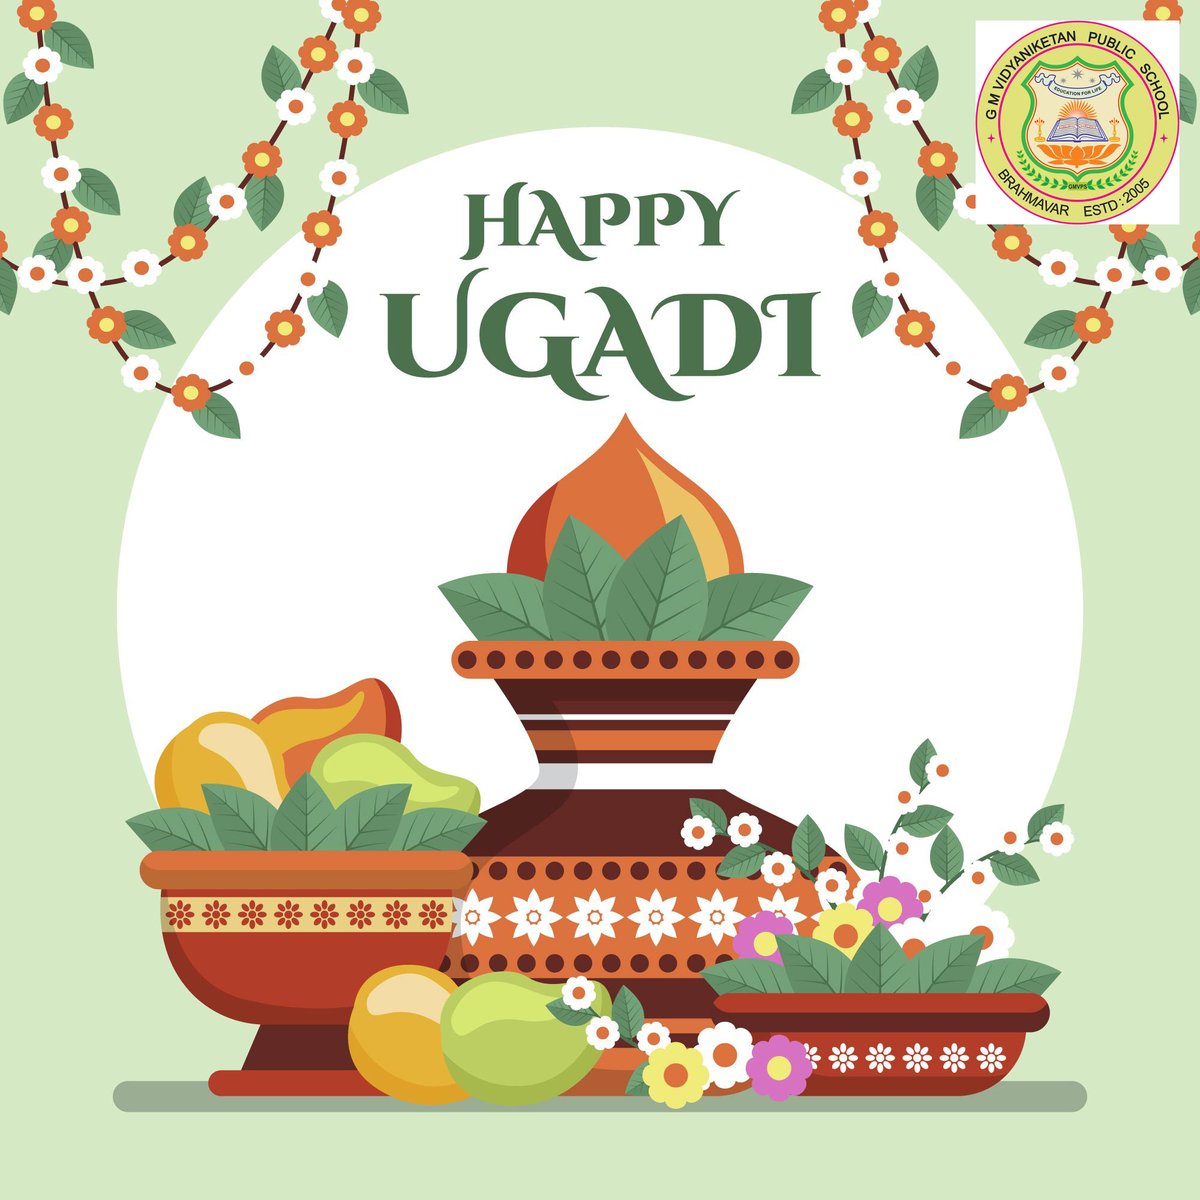 Here's to a Fresh Start and an Exciting Year Ahead. May You and Your Family Enjoy a Happy Ugadi.
#GMVidyaniketanPublicSchool #GMVPS #SchoolsOfKarnataka #TeachersOfInstagram #SchoolsOfInstagram #Education #LearningTogether #SchoolPride #ClassroomChronicles #ExtraCurriculars